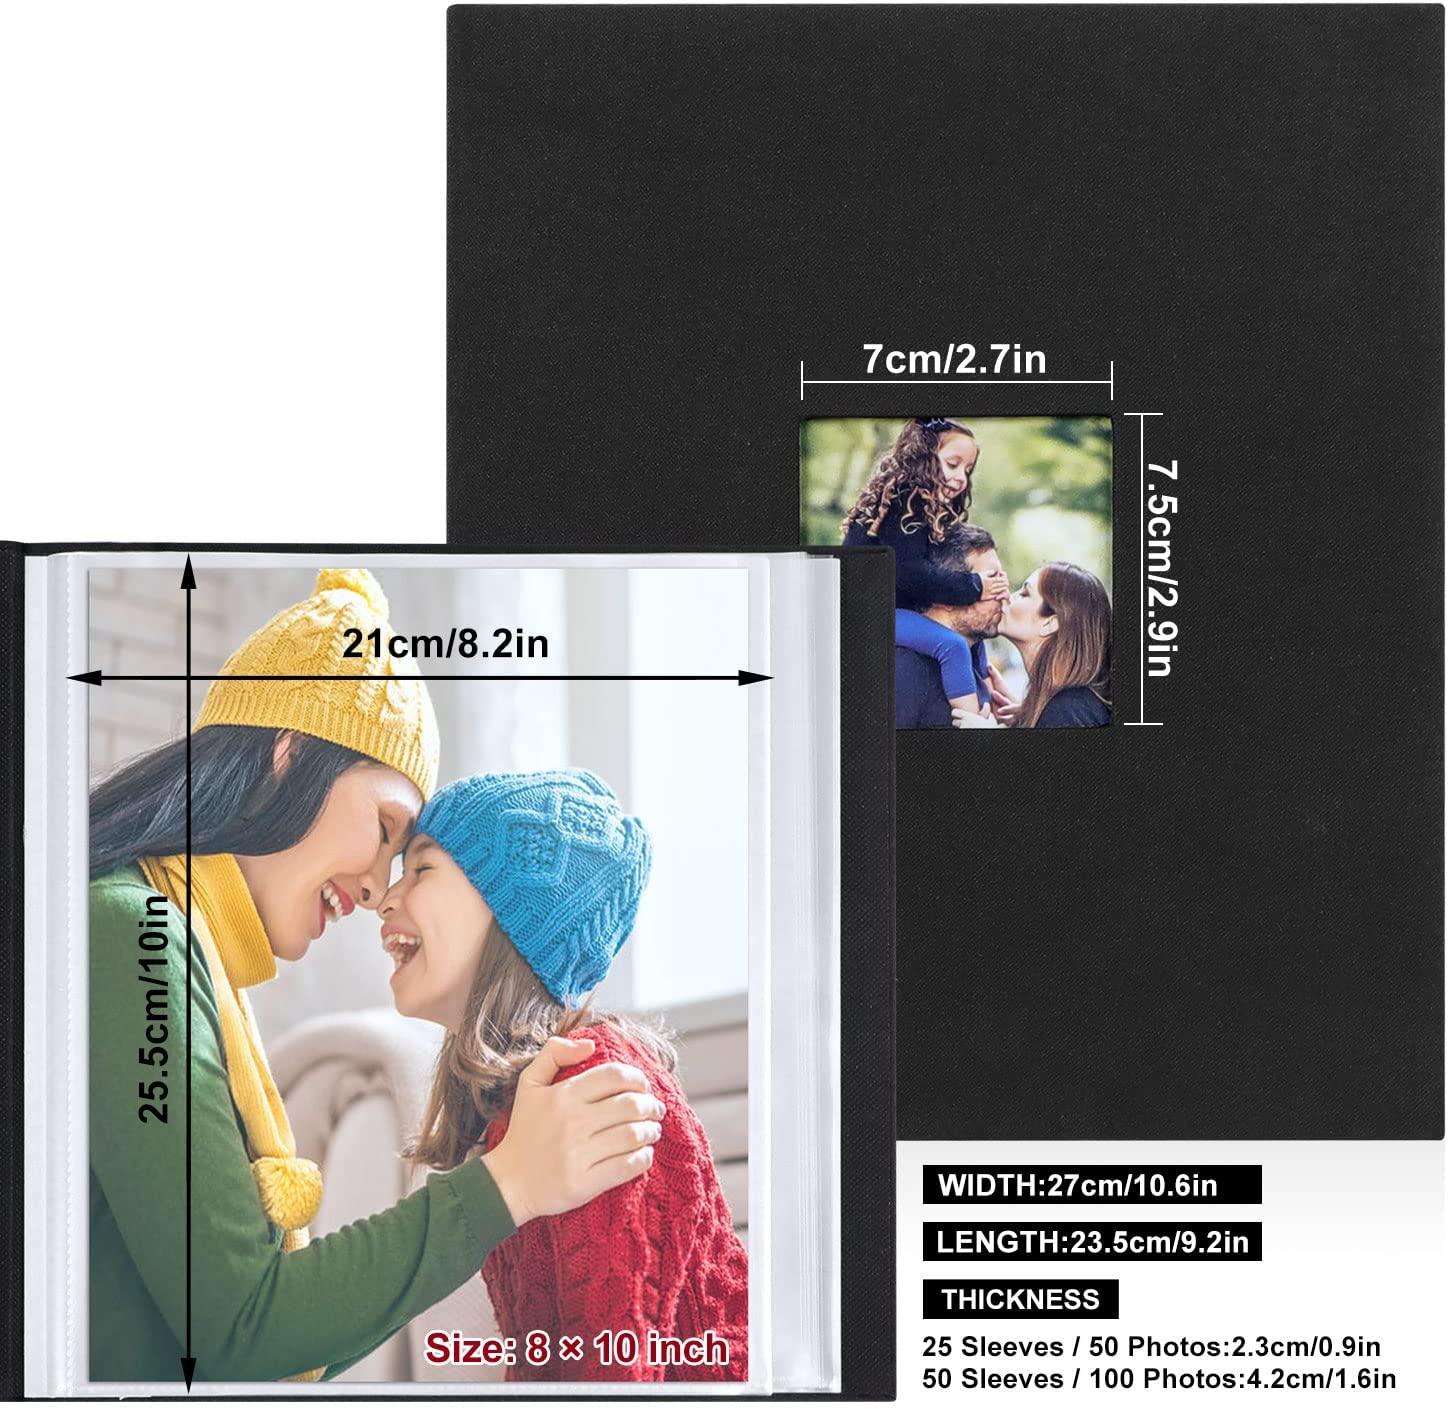  Lanpn Photo Album 11x14, Linen Hard Cover Acid Free Slip Slide  in Photo Albums Sleeves Holds 50 Top Load Vertical Only 11x14 Pictures  (Grey) : Everything Else